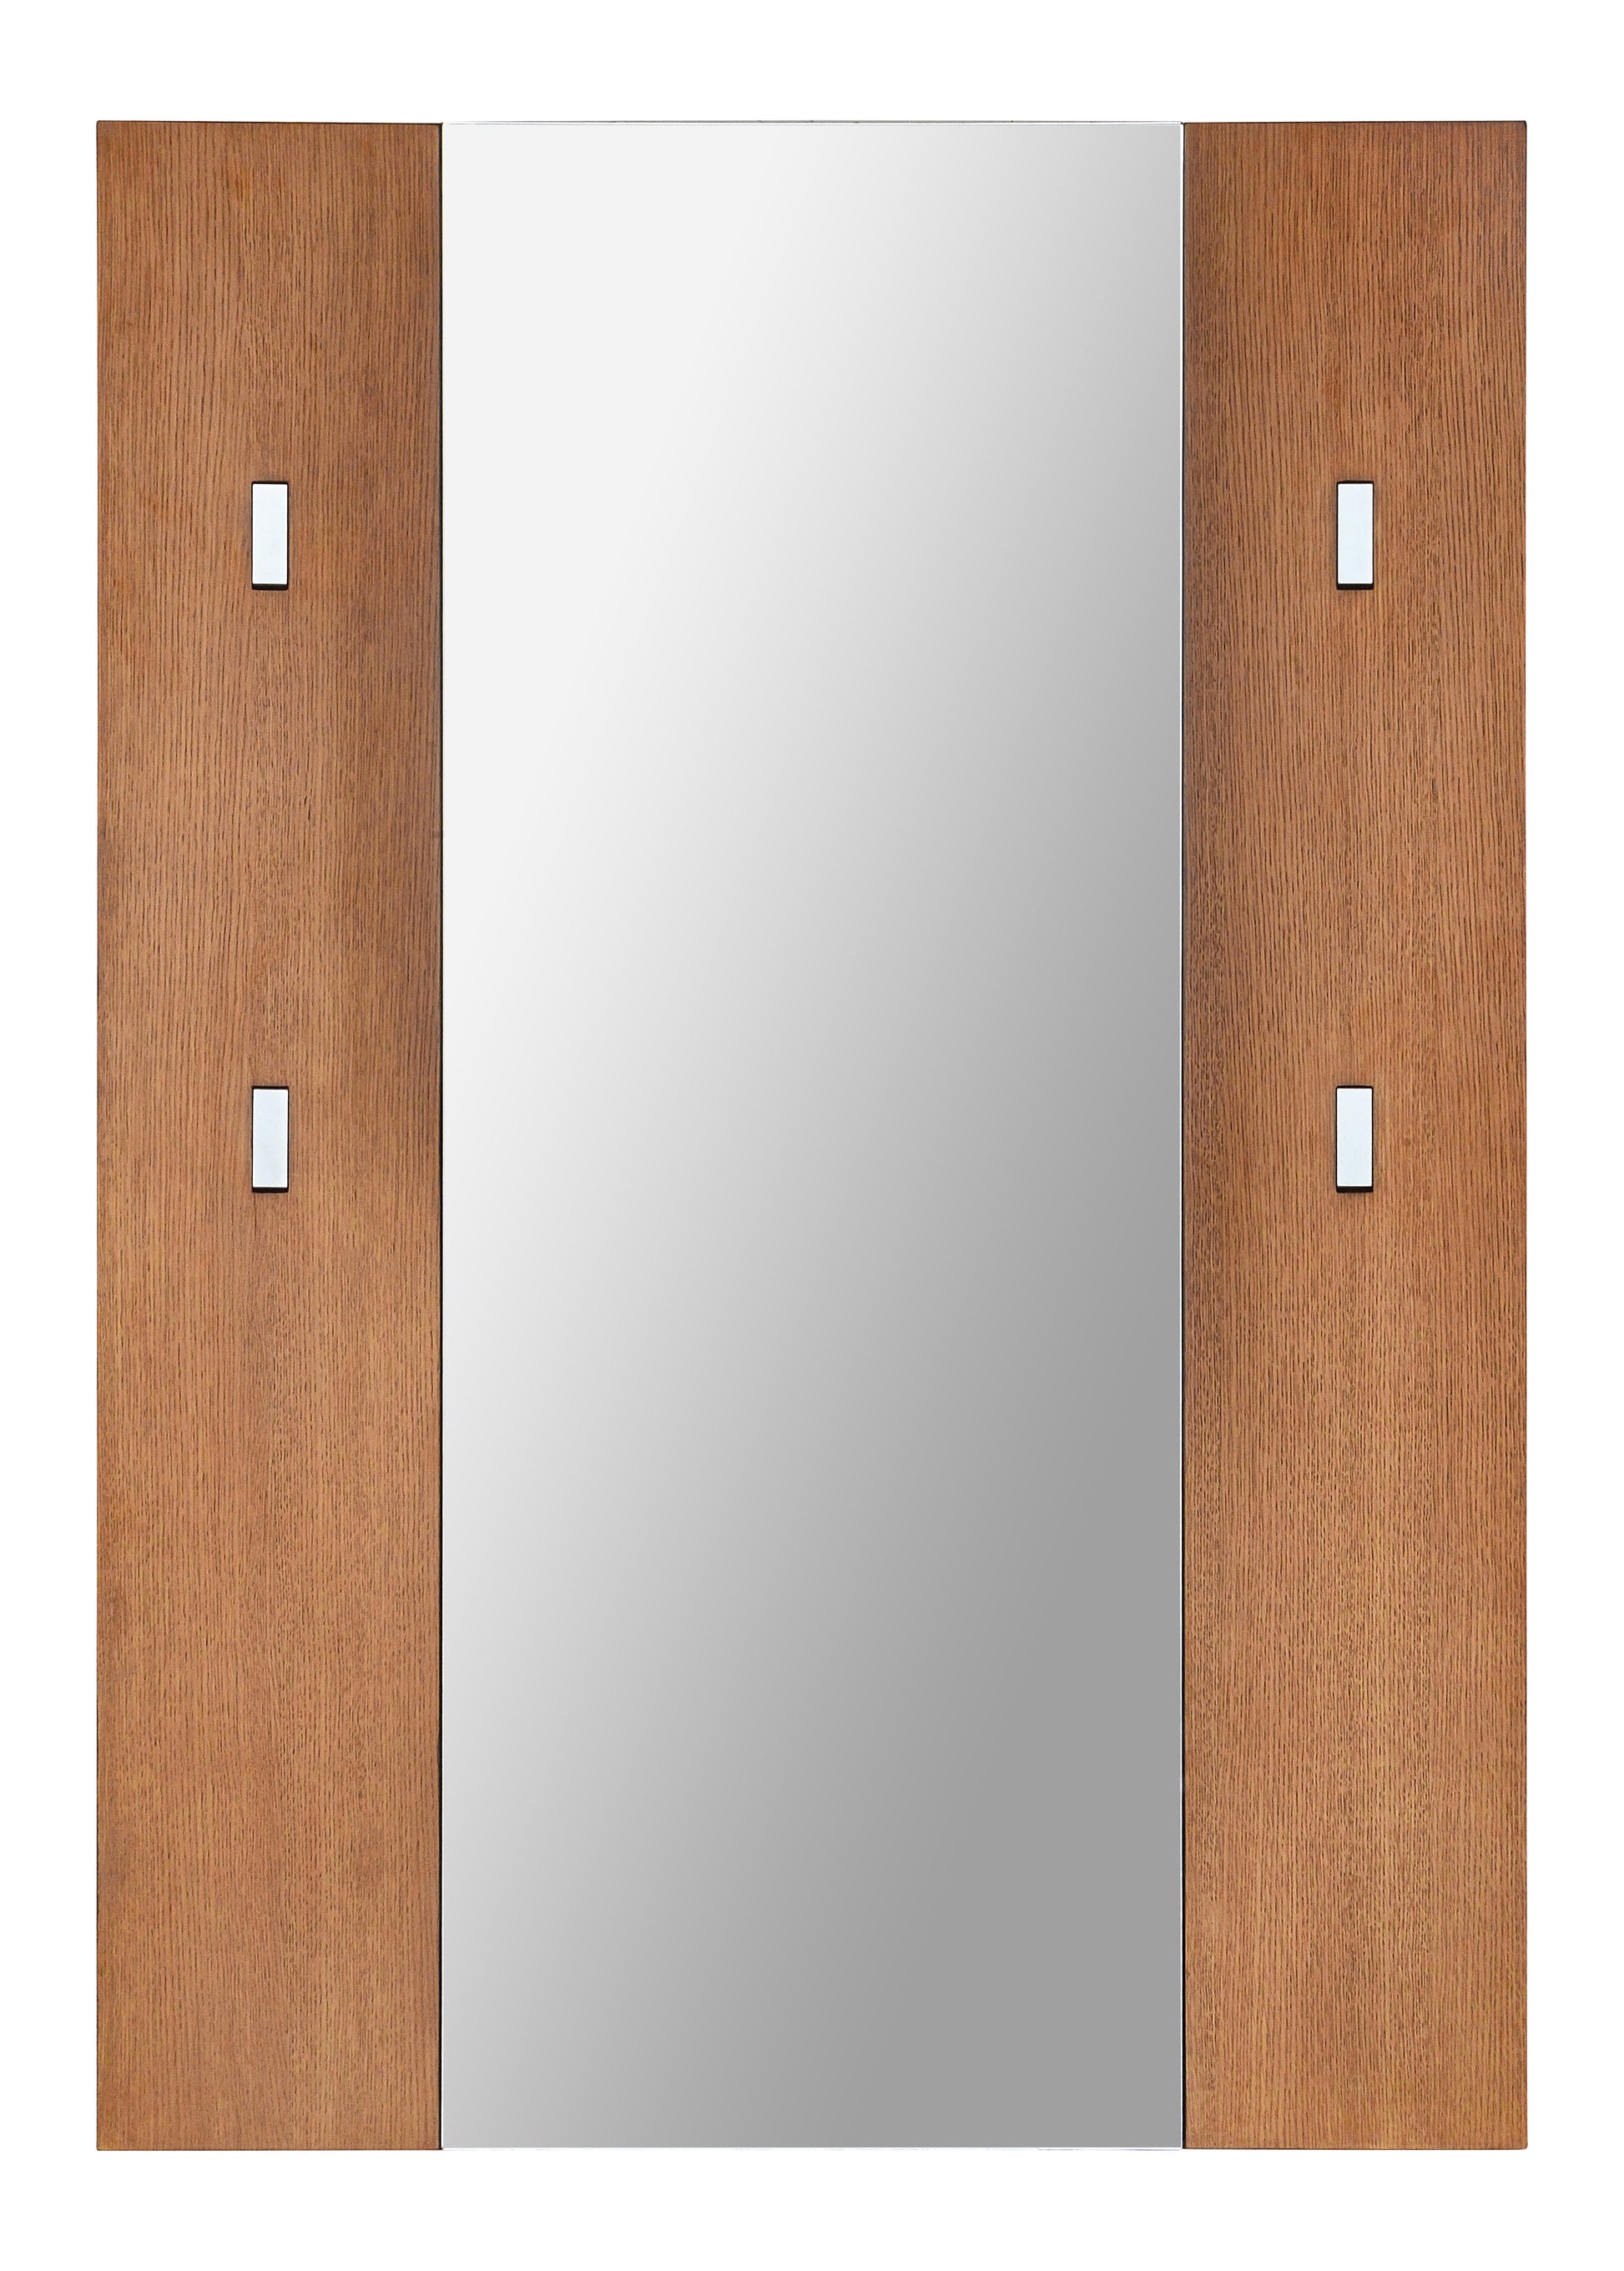 Flush lay mirror with wood panels and coat hooks